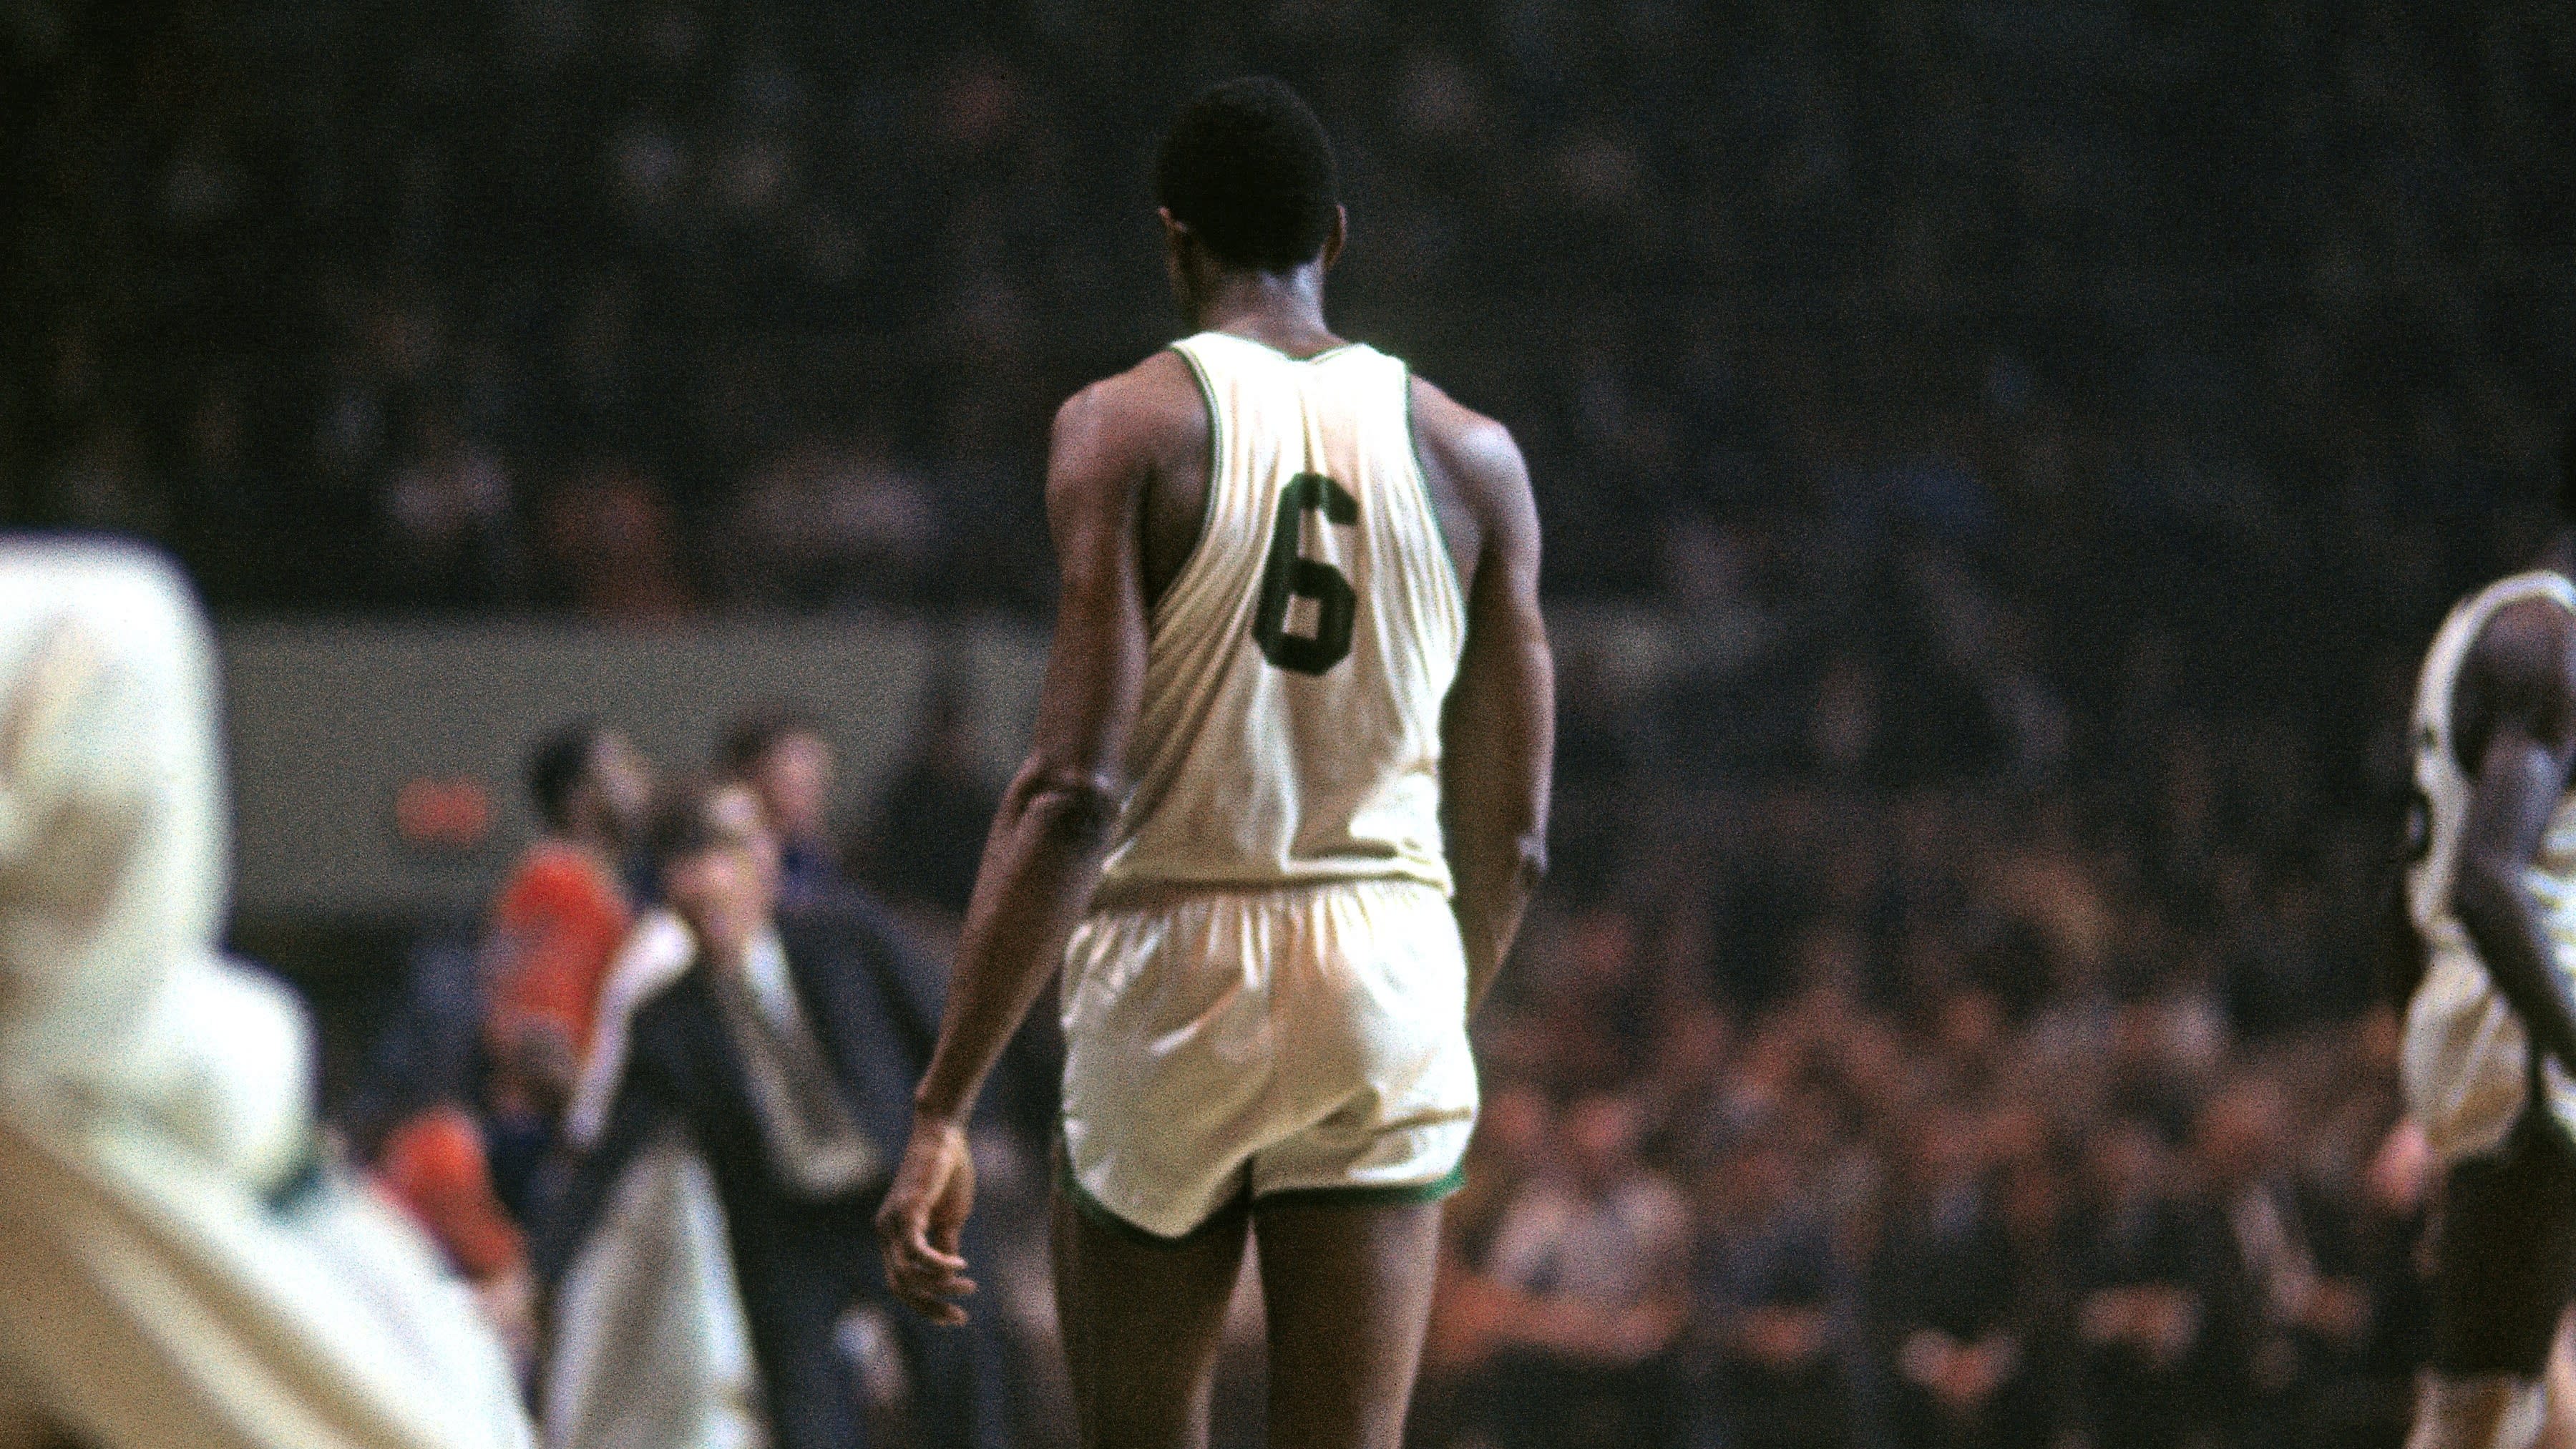 Bill Russell's No. 6 will be retired league-wide by the NBA